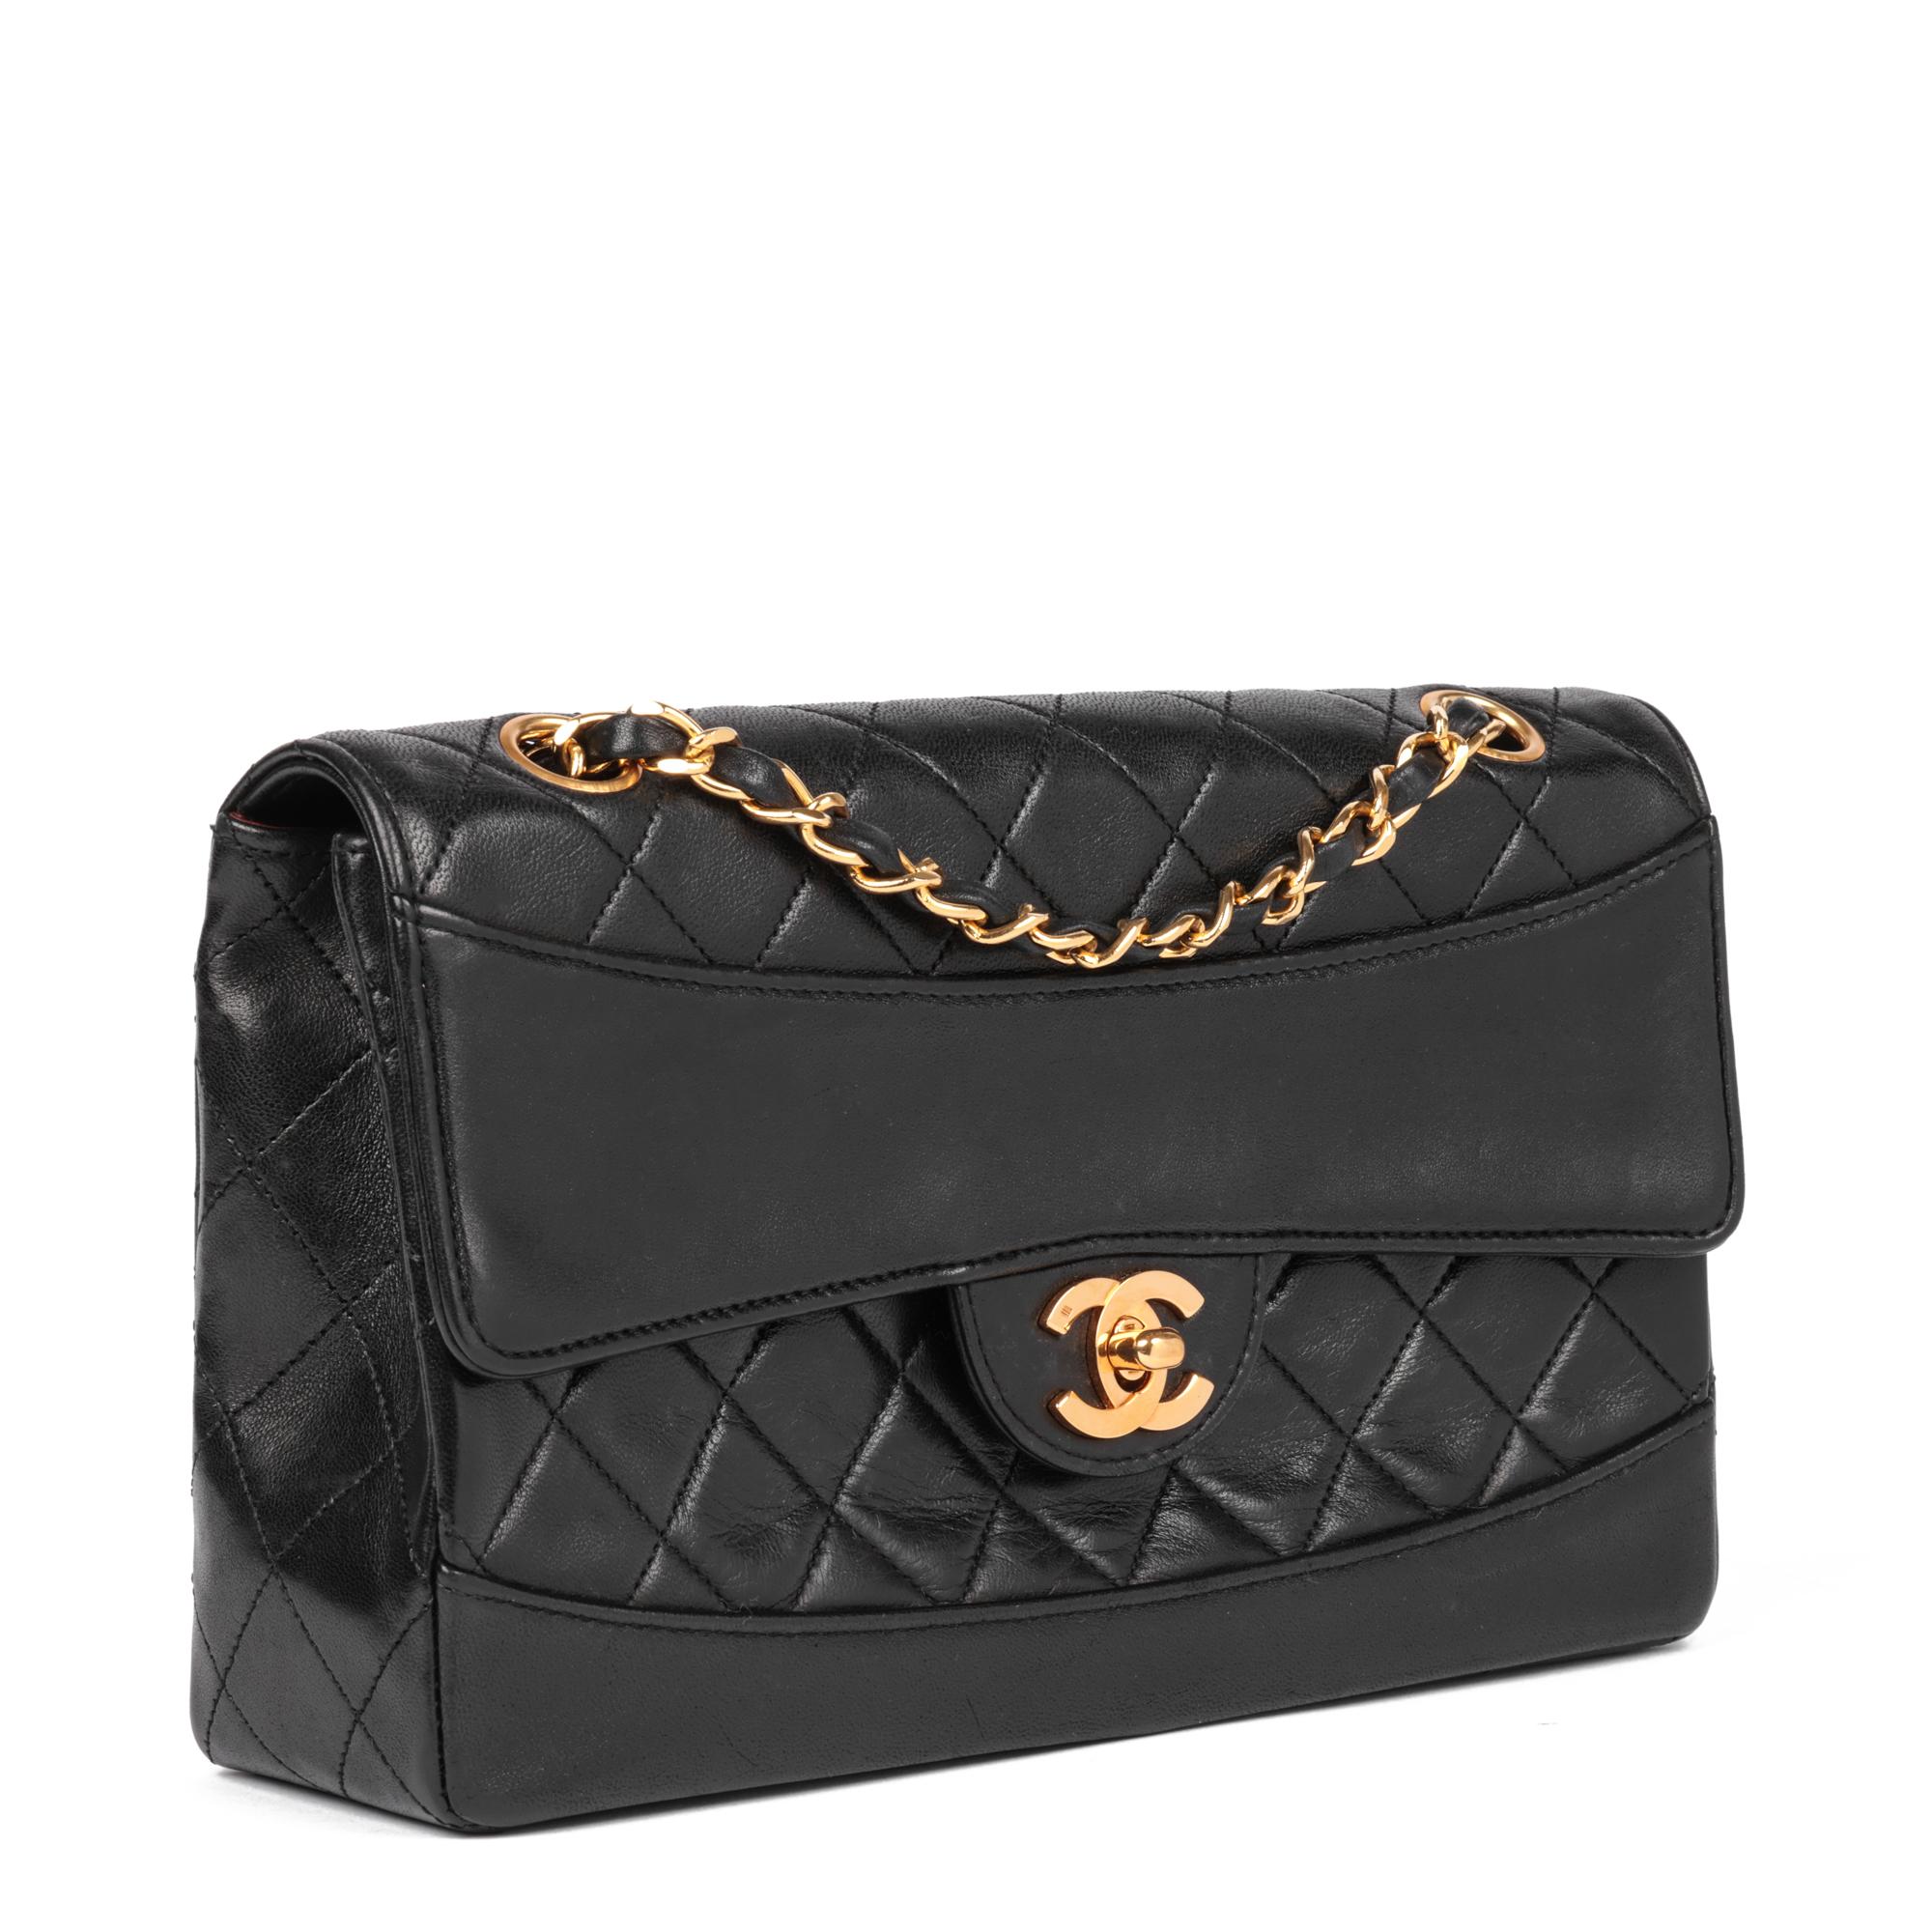 CHANEL
Black Quilted Lambskin Vintage Medium Classic Single Flap Bag with Wallet

Xupes Reference: HB4962
Serial Number: 1474808
Age (Circa): 1990
Accompanied By: Chanel Dust Bag, Authenticity Card, Wallet
Authenticity Details:  Authenticity Card,